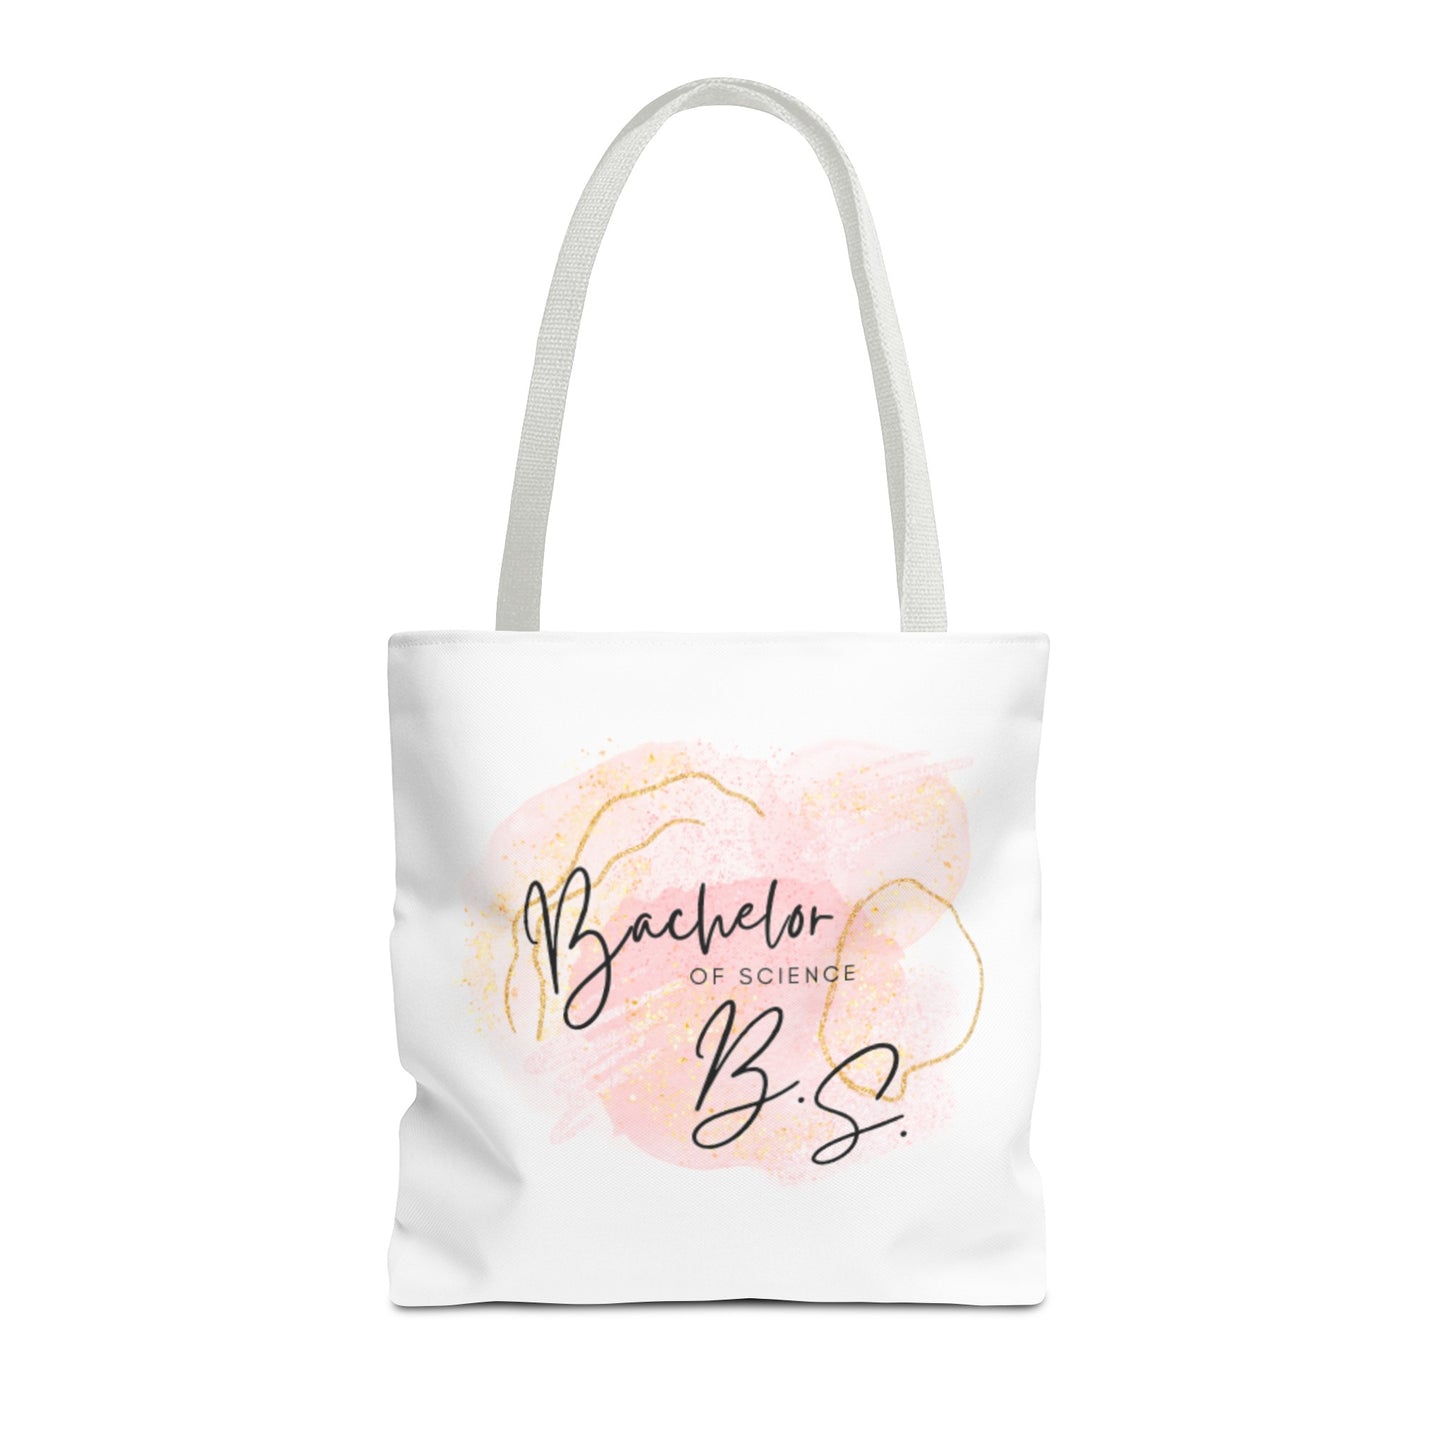 B.S.- Tote Bags with Bachelor of Science Credentials